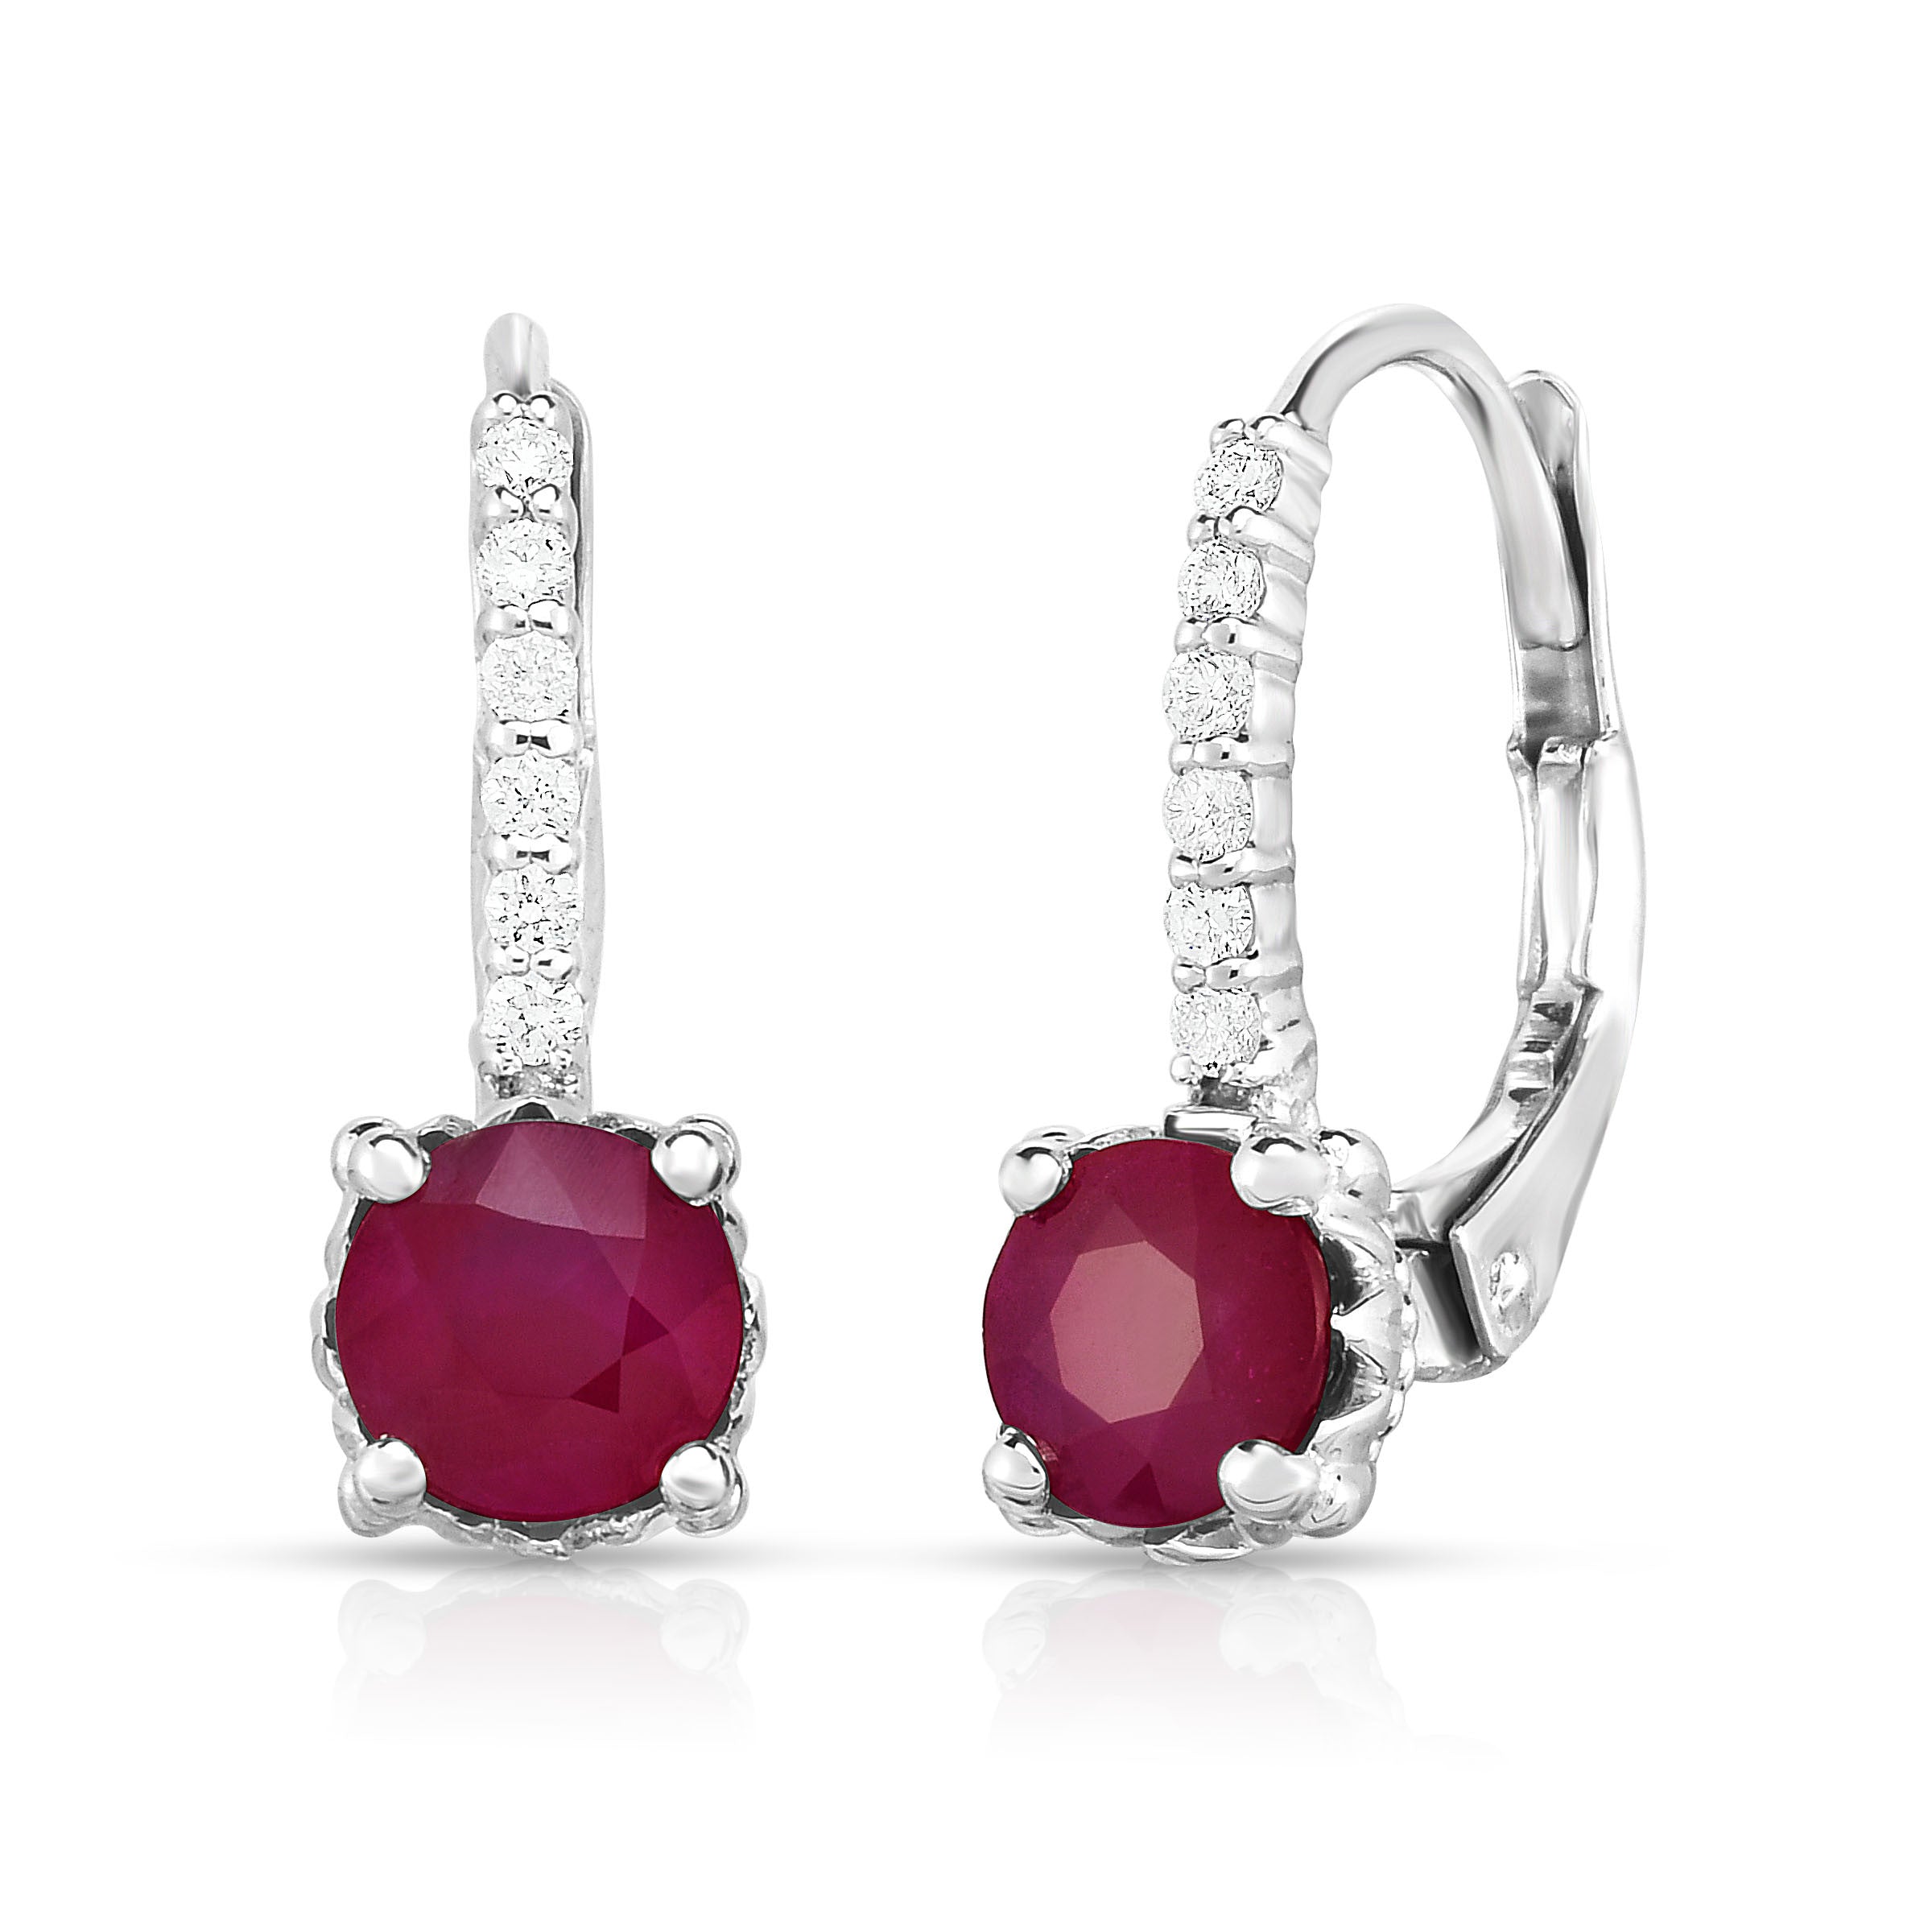 14K White Gold Ruby & Diamond (0.08 Ct, G-H Color, SI2-I1 Clarity) Lev ...